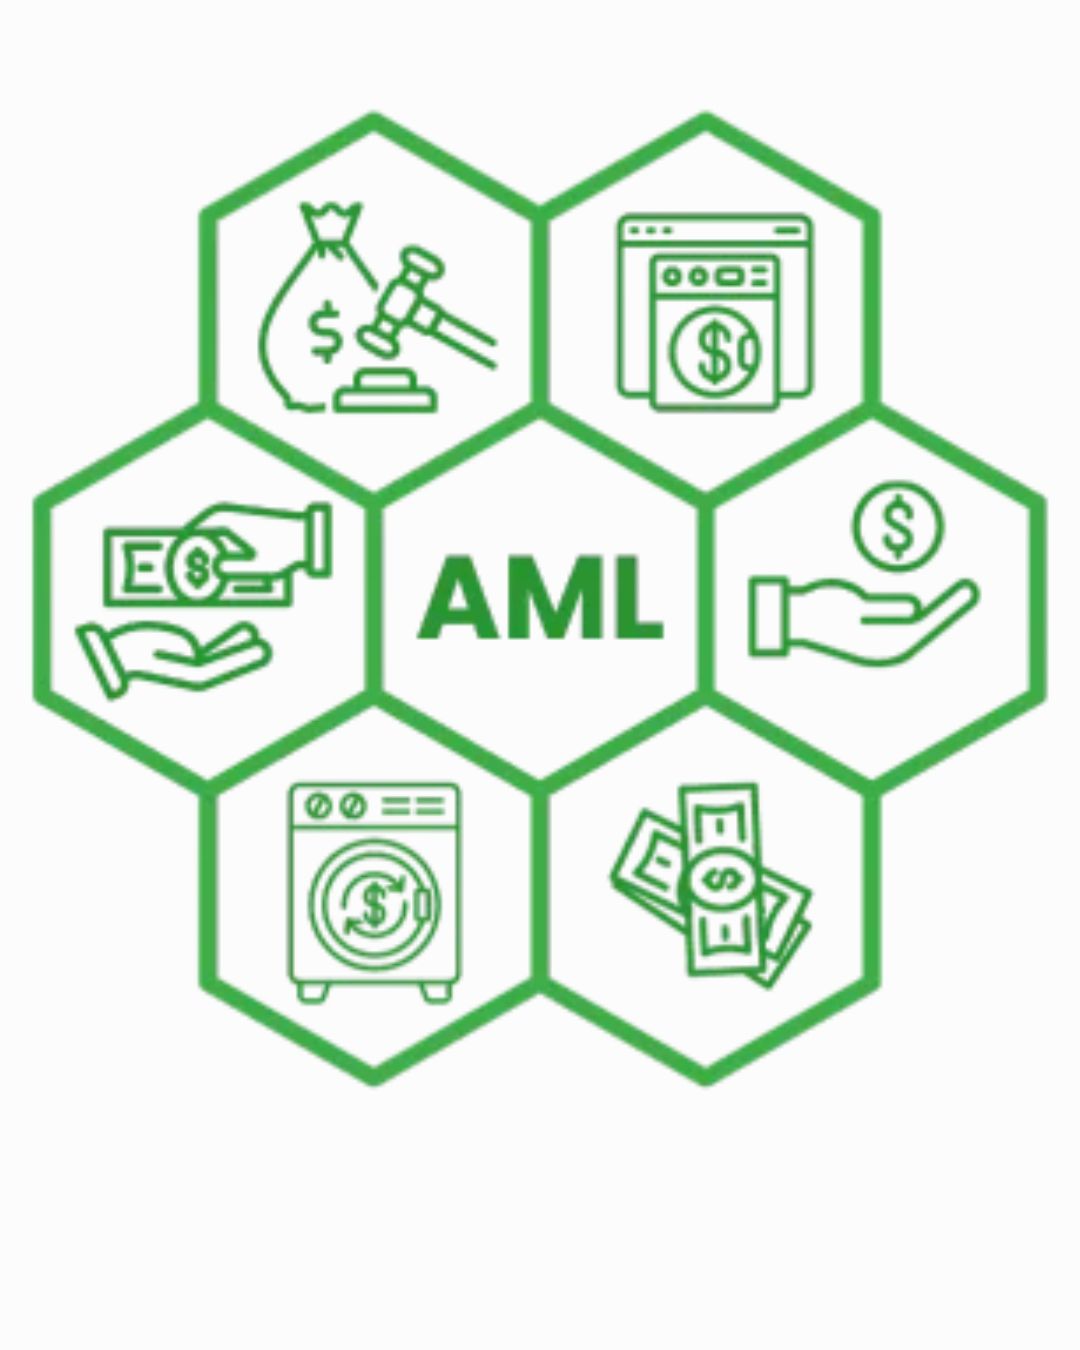 Why should you purchase our AML Sanctions List? - Washington - Bellevue ID1532838 1